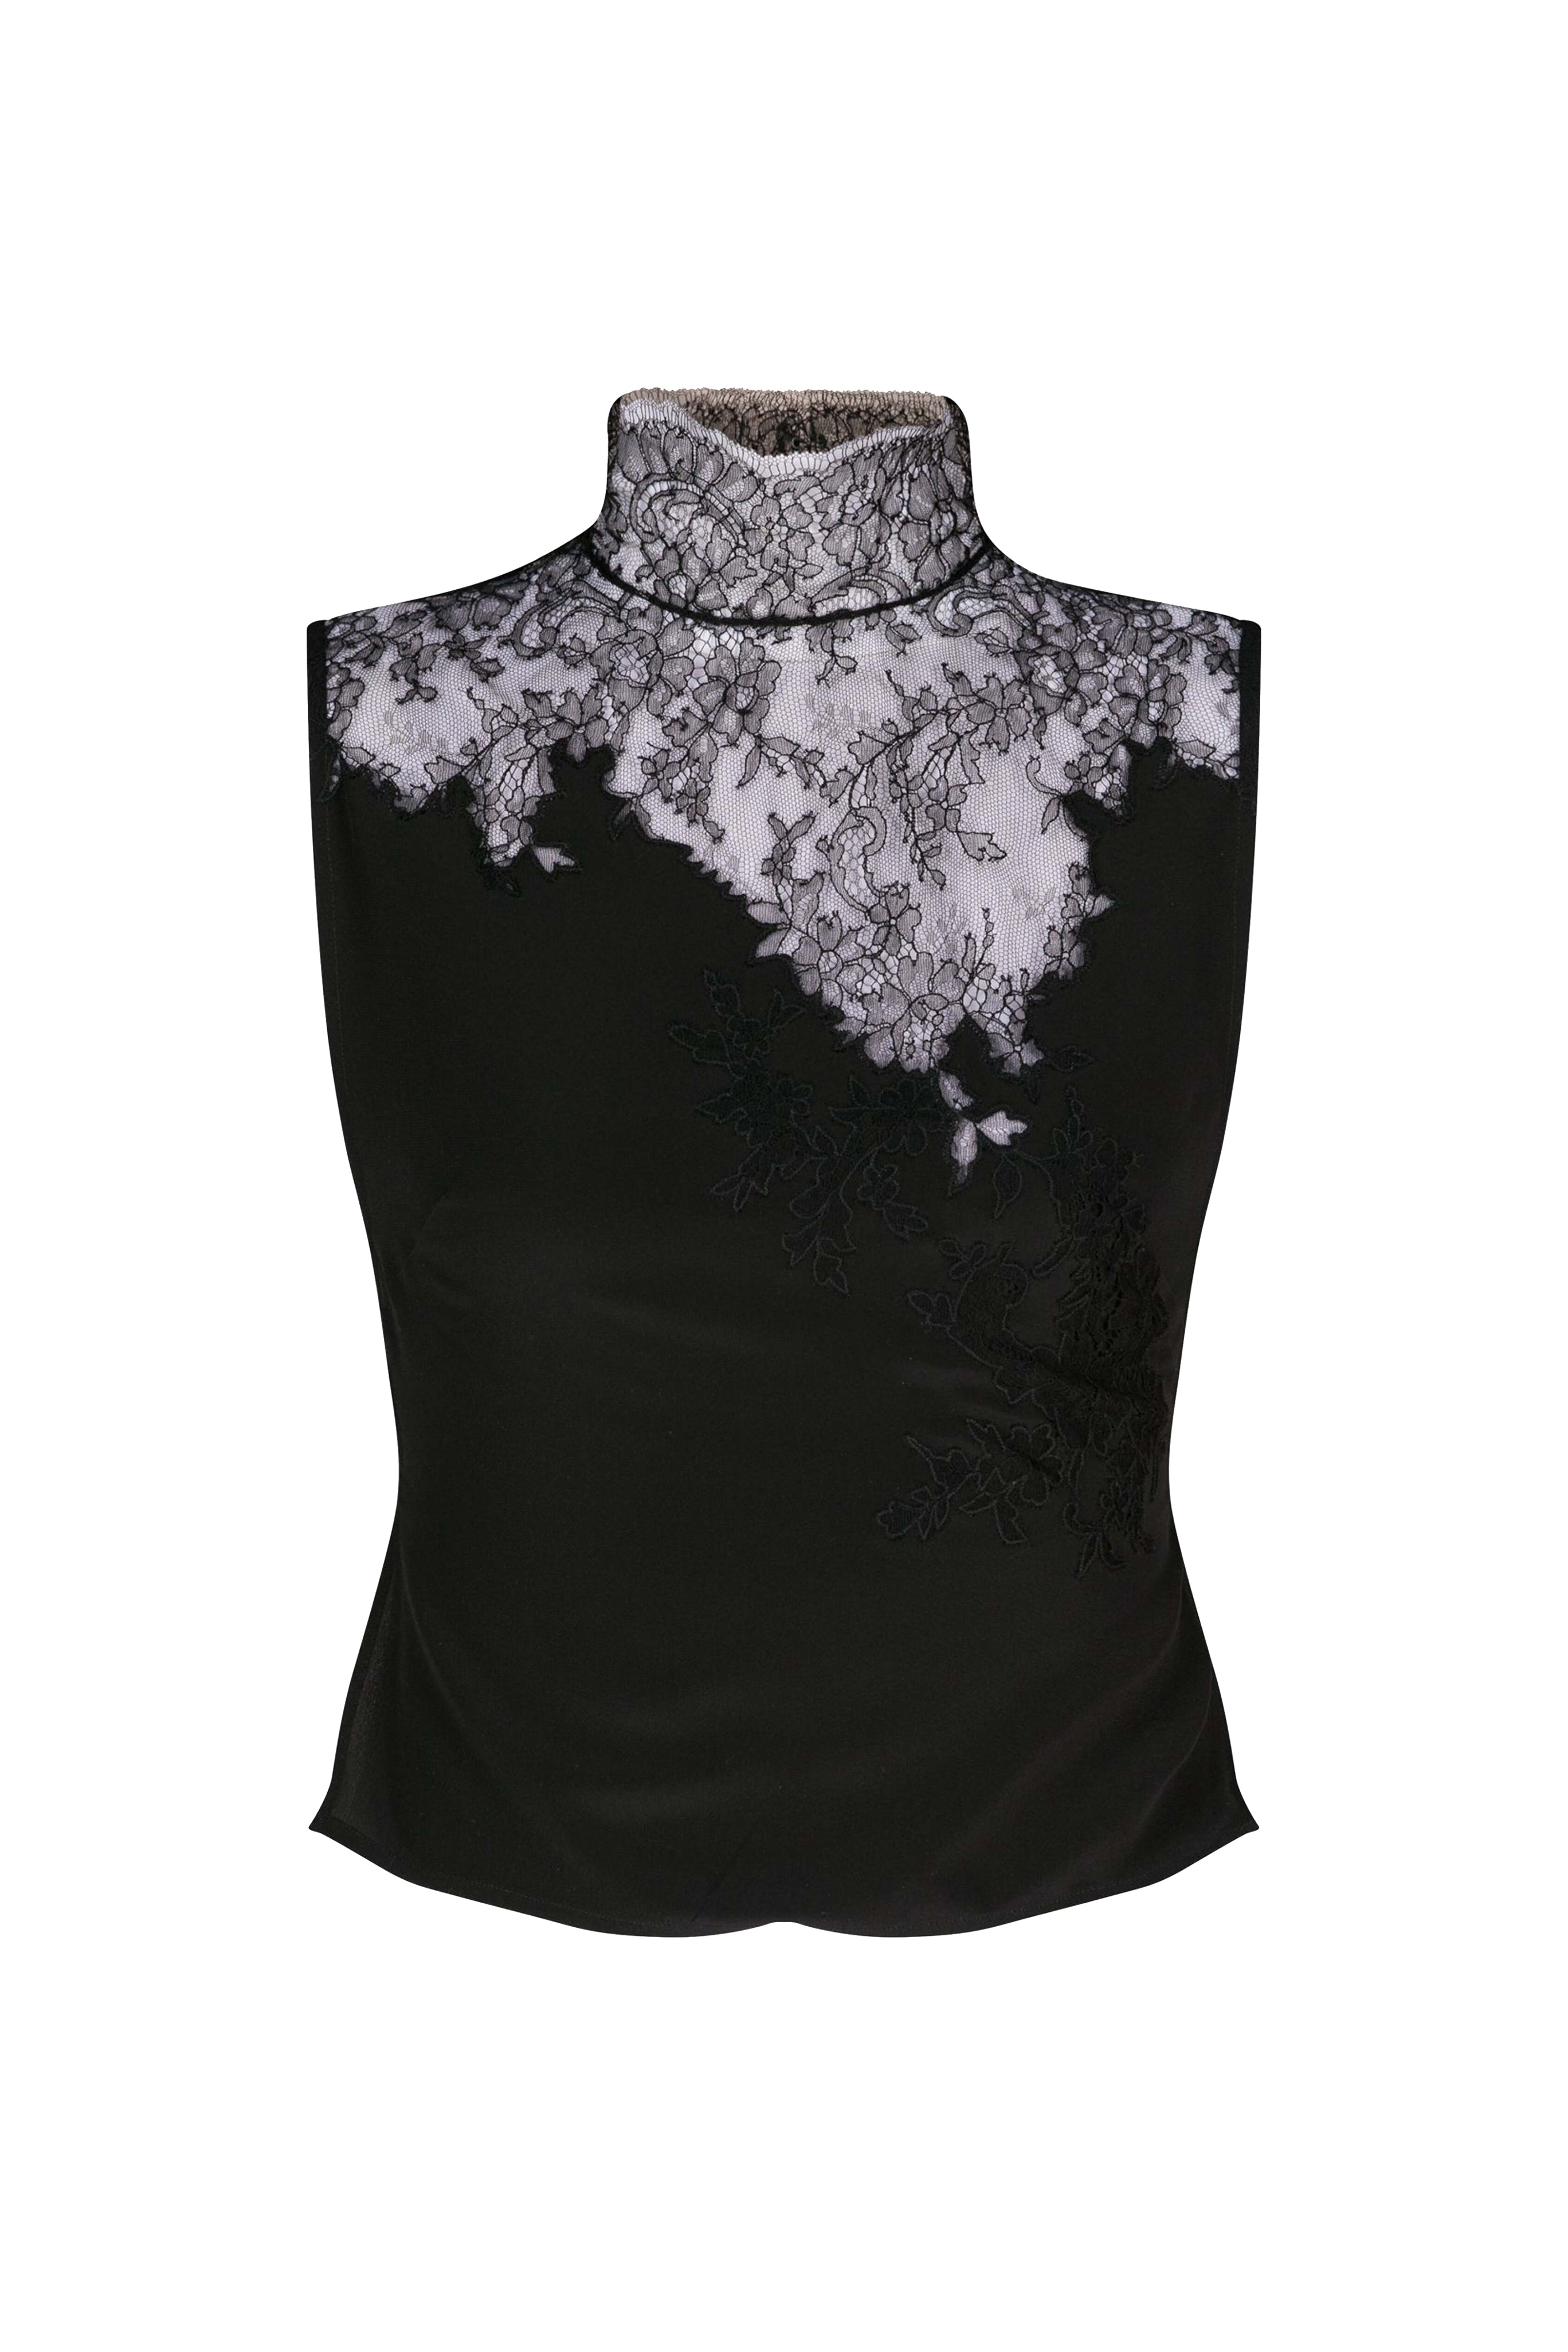 DRIES VAN NOTEN Embroidered Lace Top